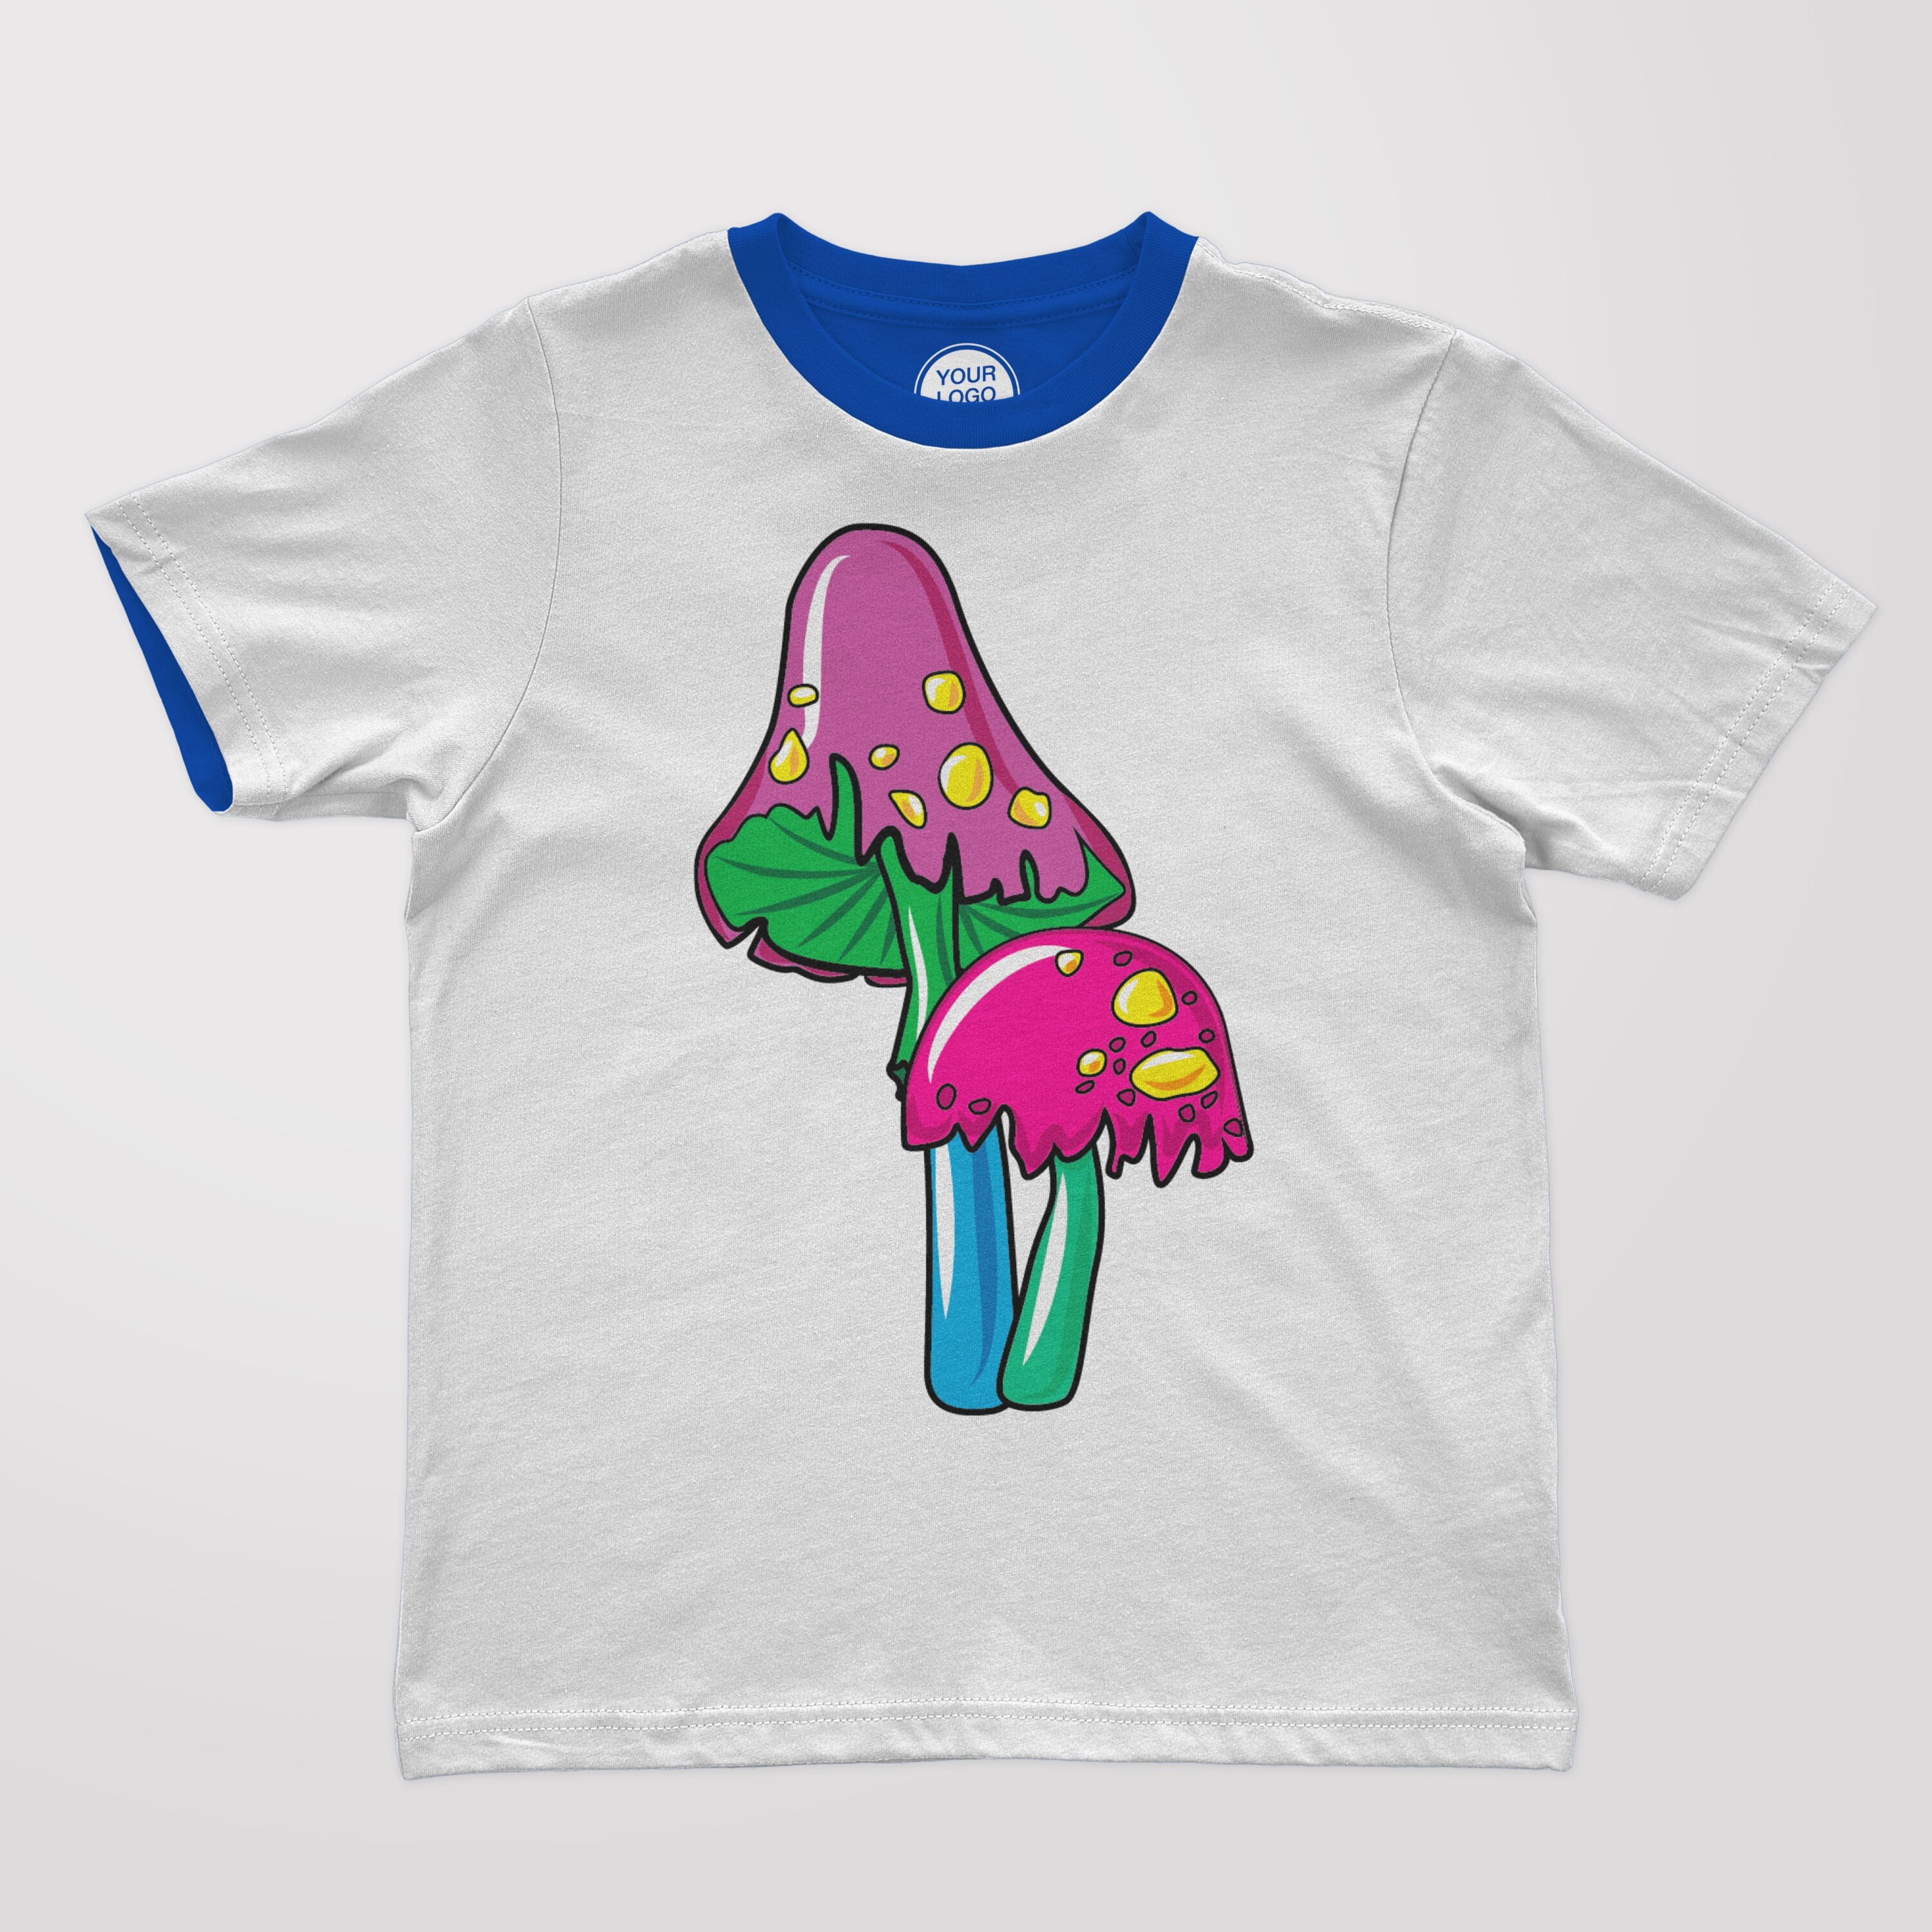 T-shirt design with printed colorful mushrooms on it.